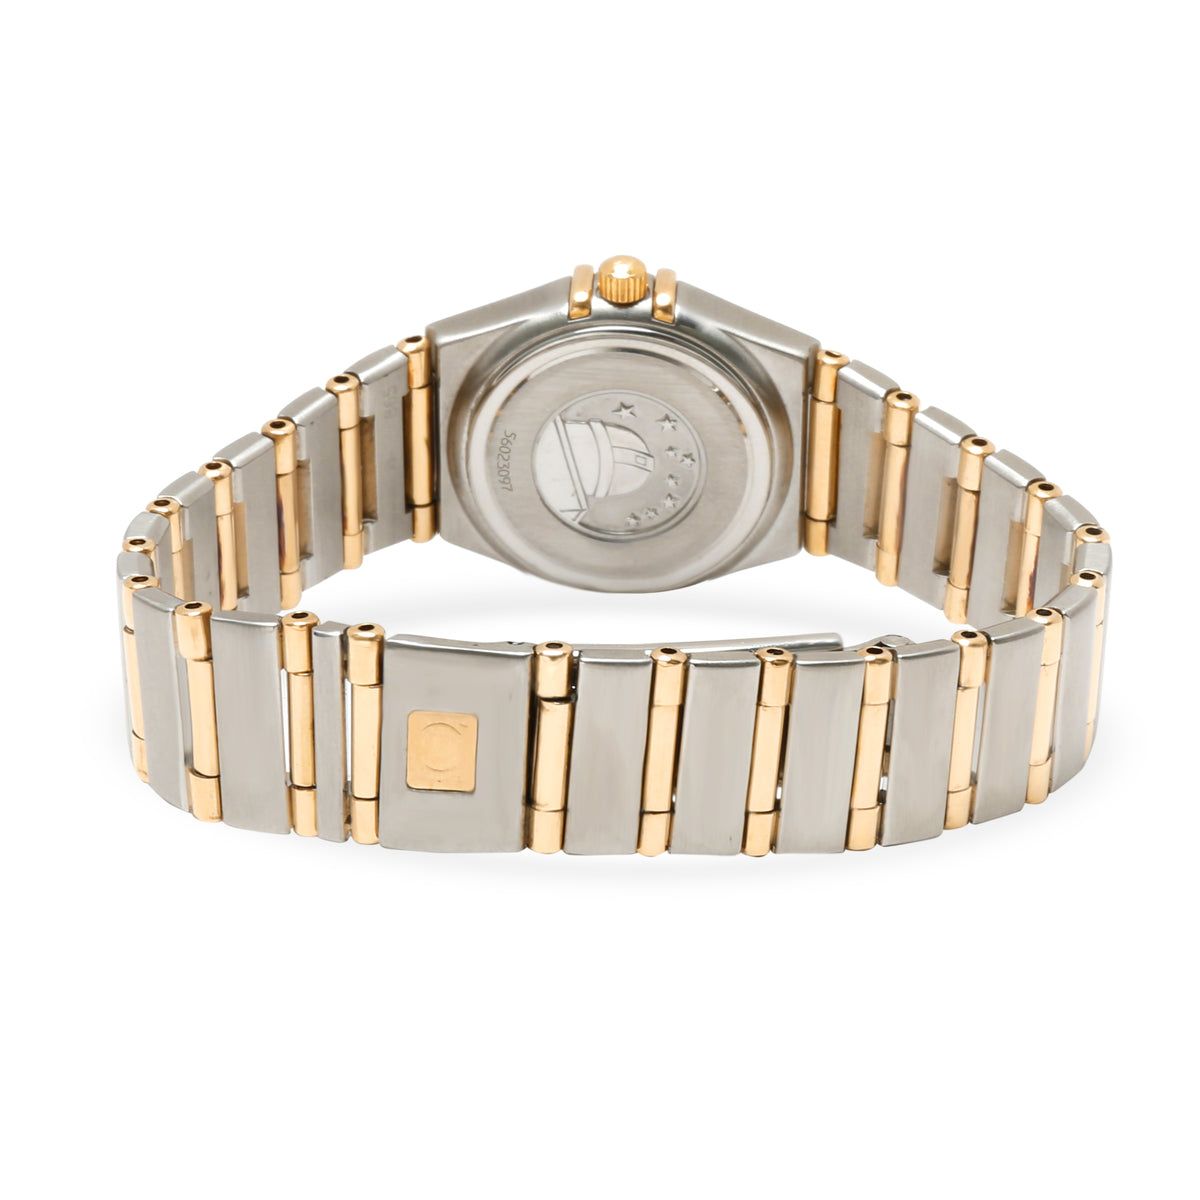 Omega Constellation 1262.10.00 Women's Watch in 18kt Stainless Steel/Yellow Gold